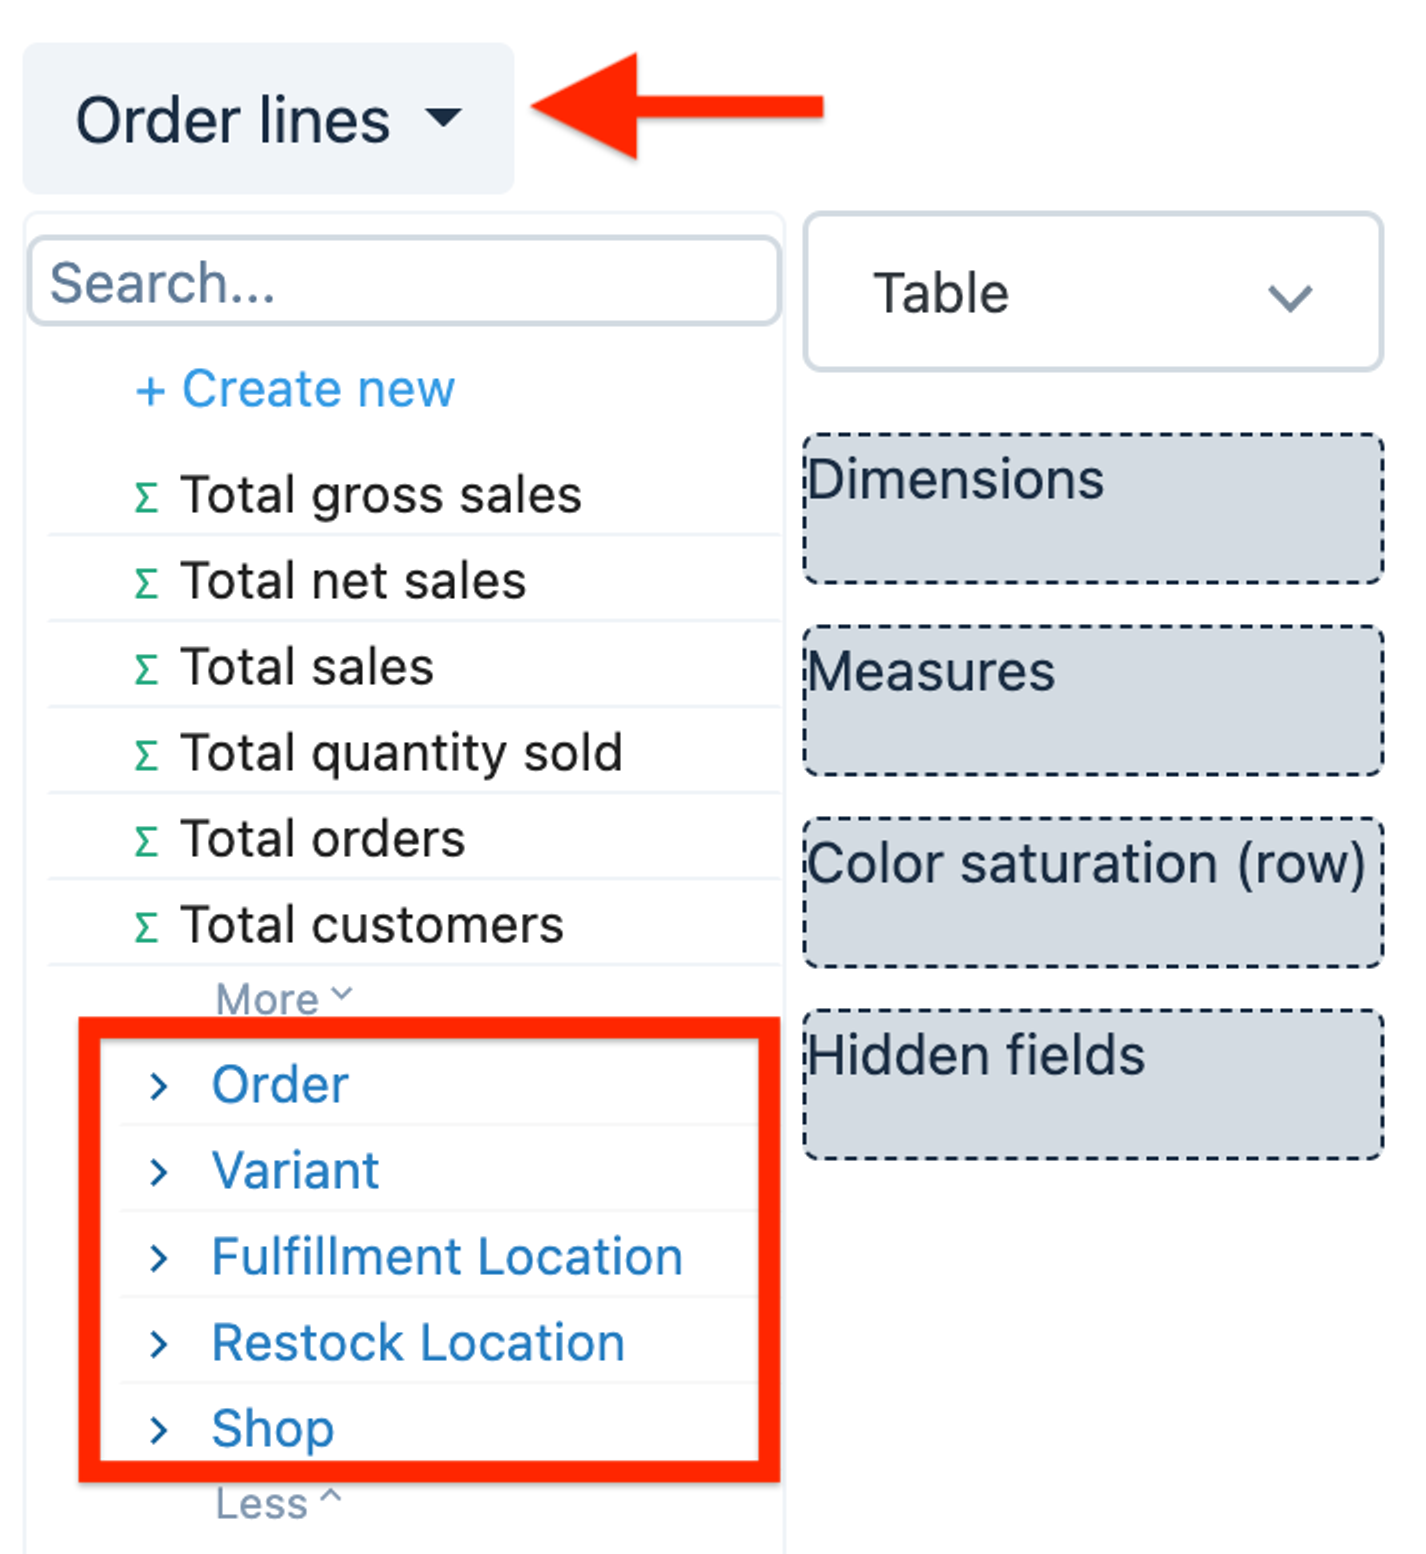 Related entities of the Order lines table